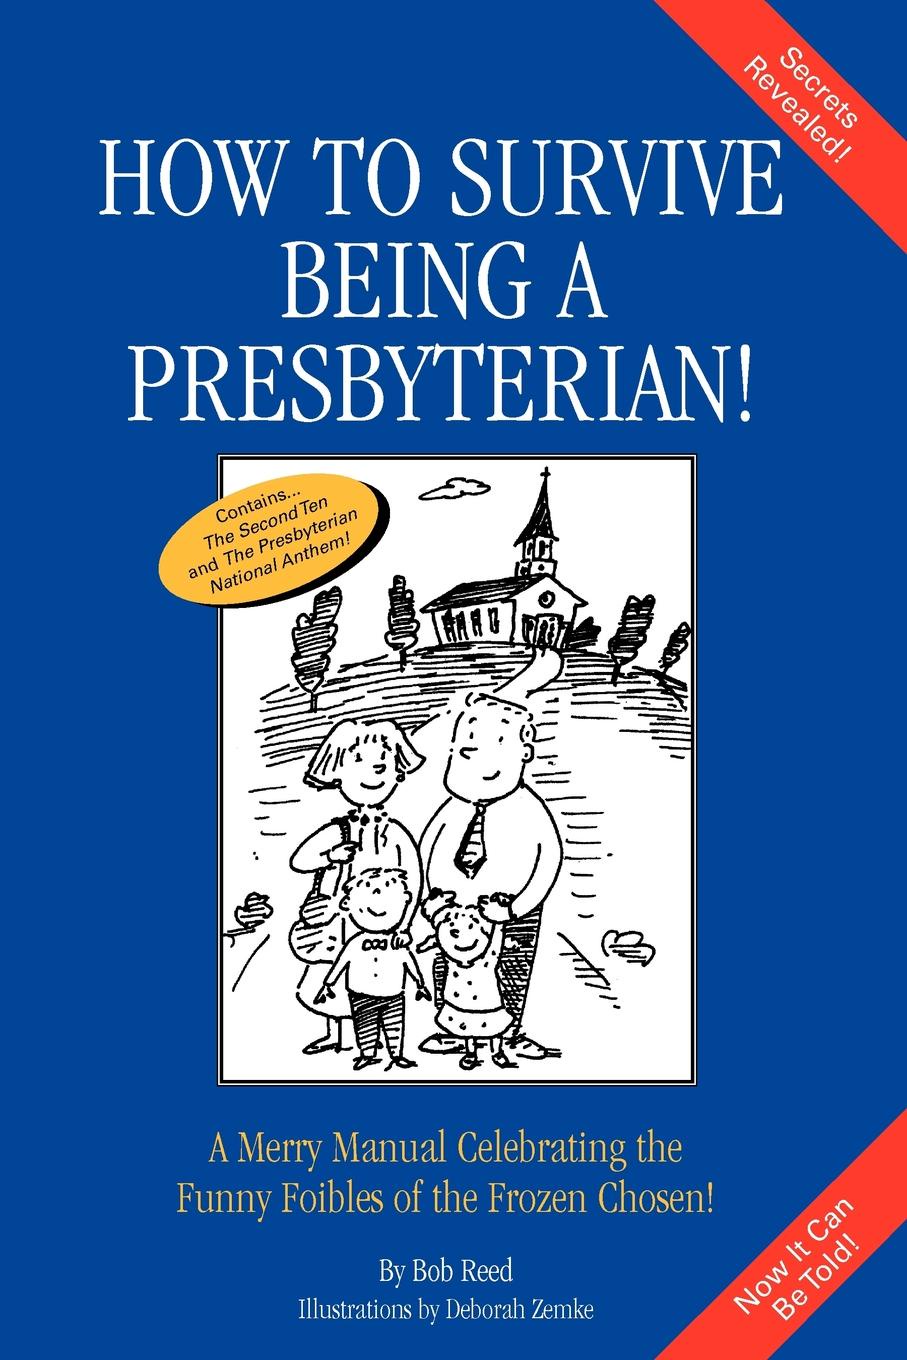 How to Survive Being a Presbyterian!. A Merry Manual Celebrating the Foibles of the Frozen Chosen